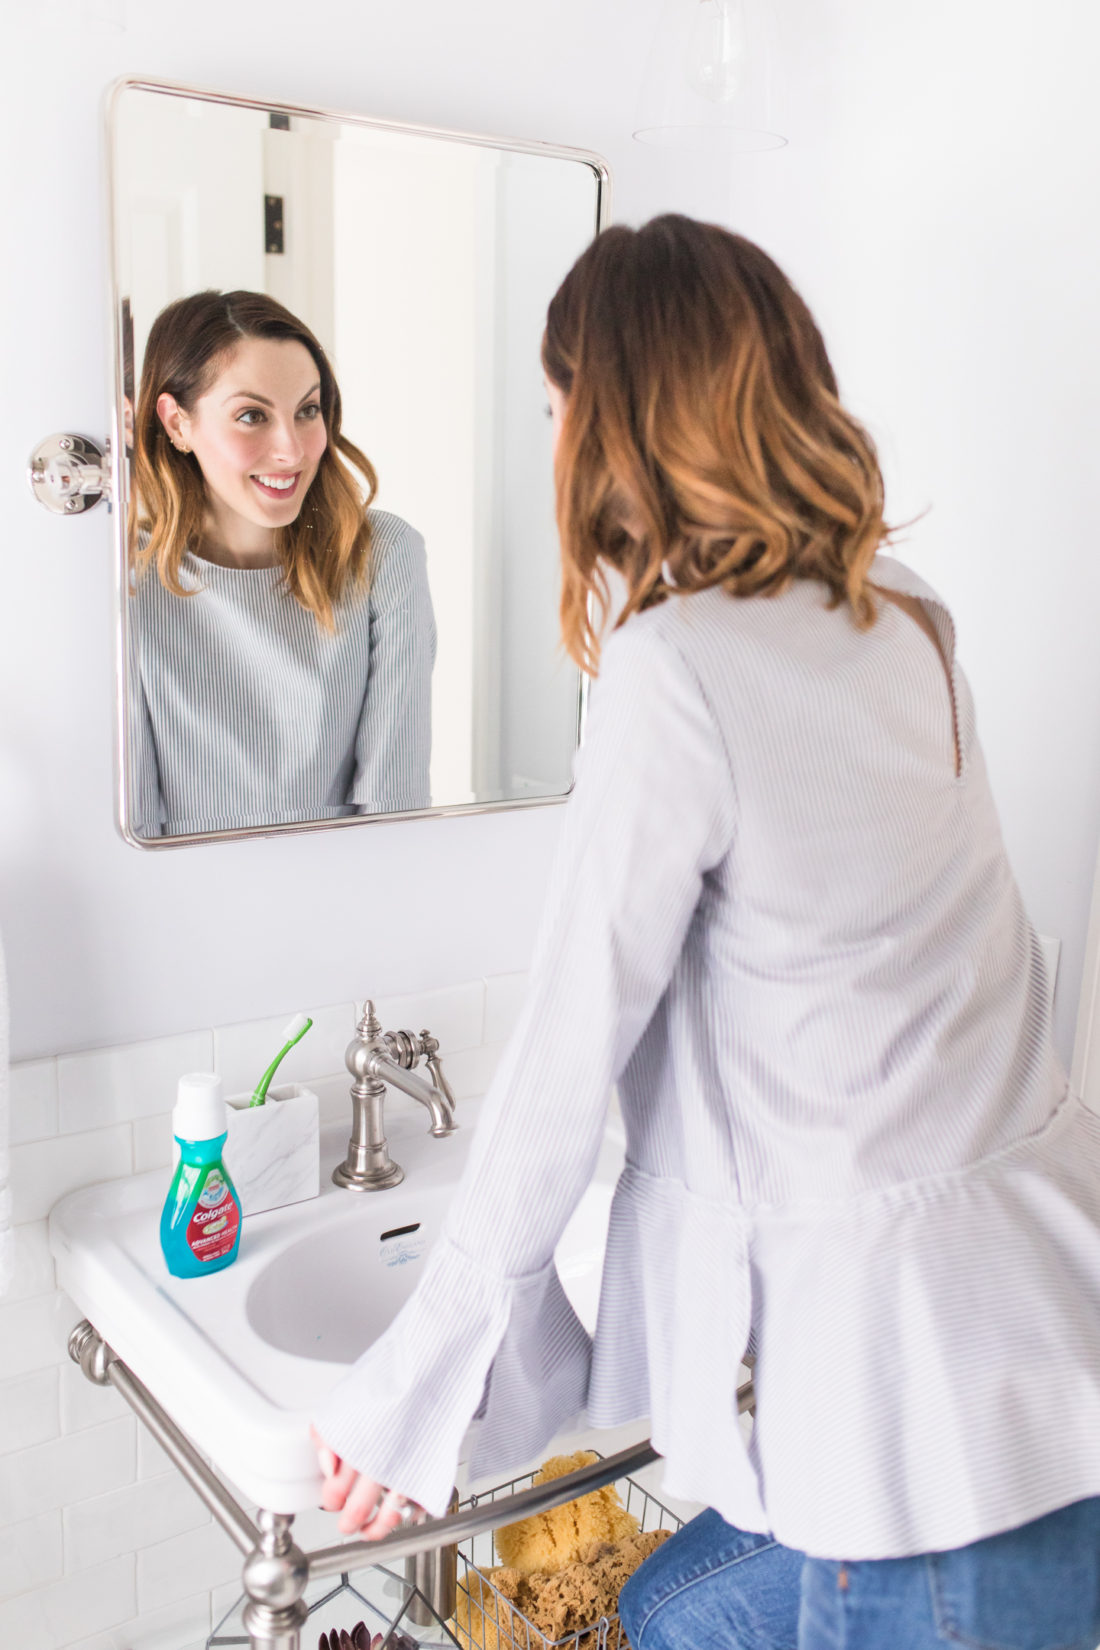 Eva Amurri Martino smiles to check out her clean teeth in the mirror